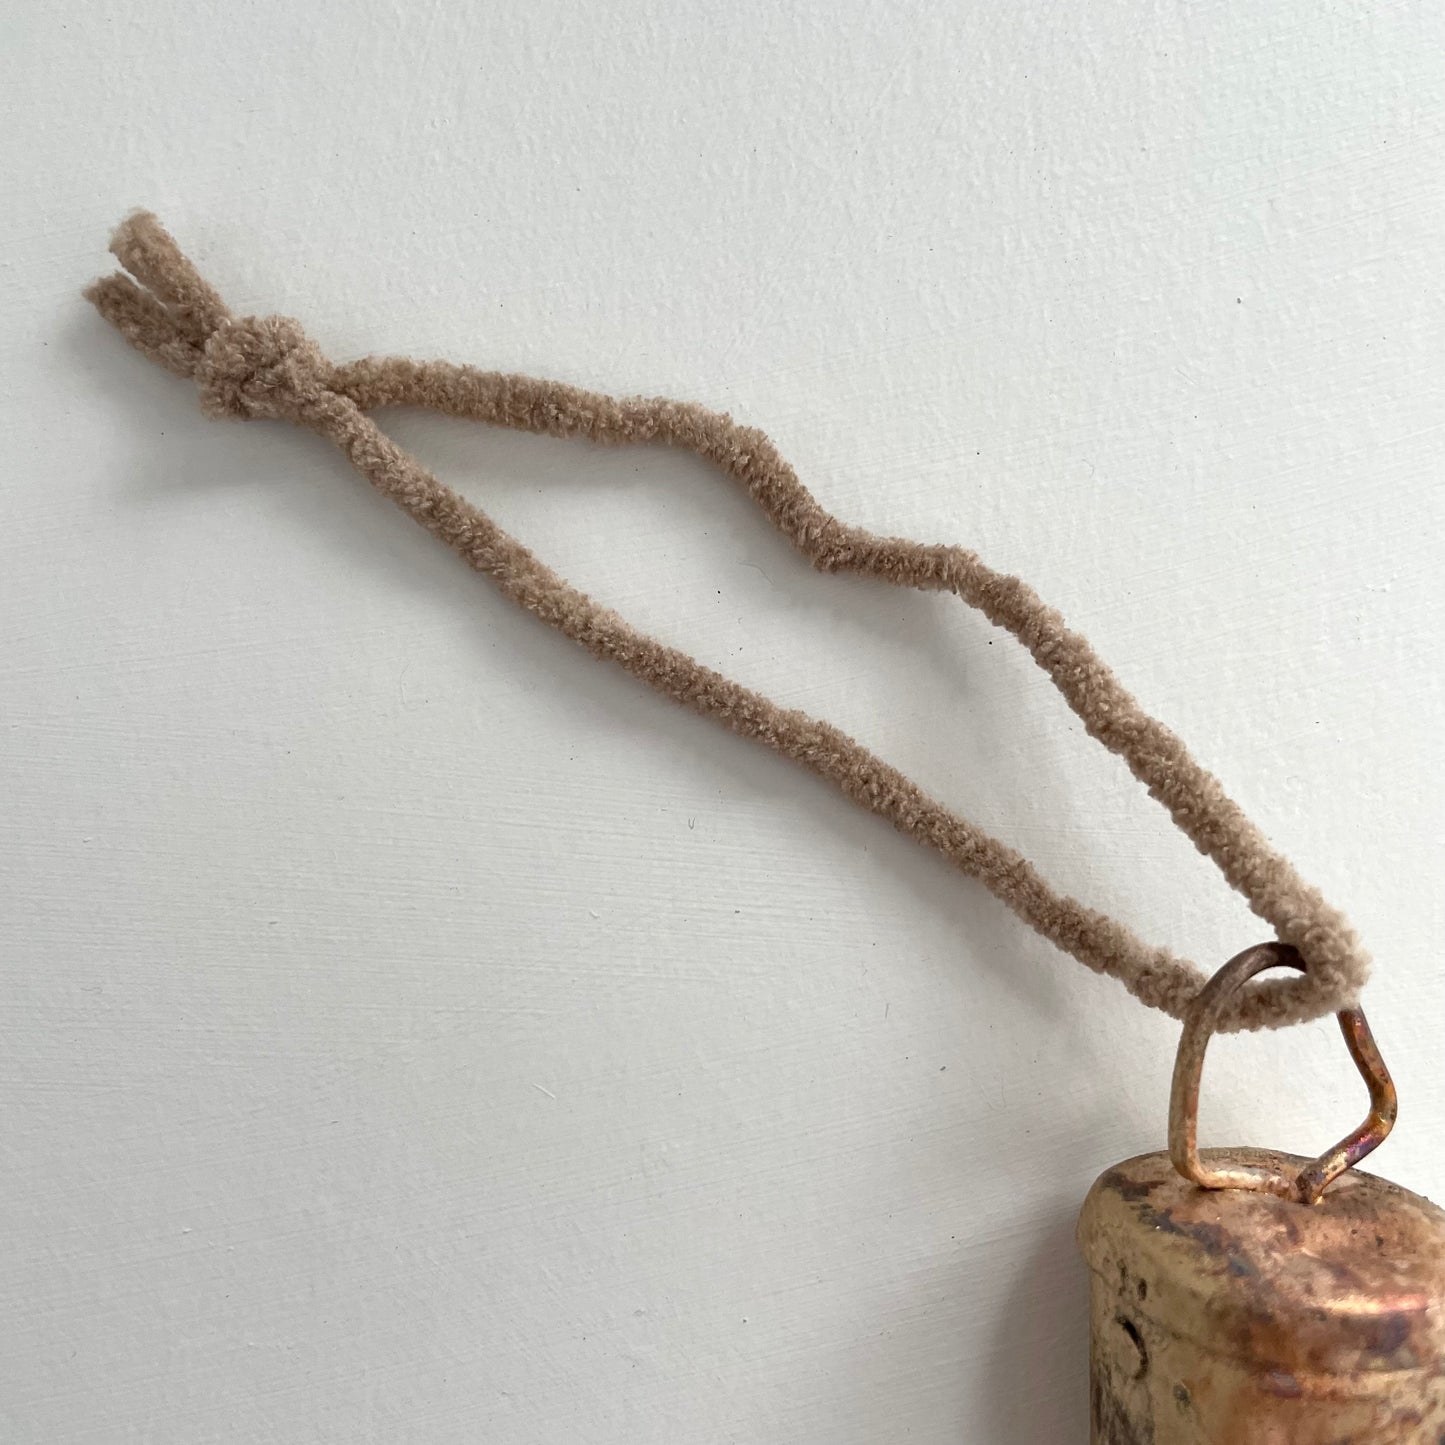 1 3/4 inch flat top tin bell with brass finish strung on twine suede and jute to make an ornament with tan suede cord